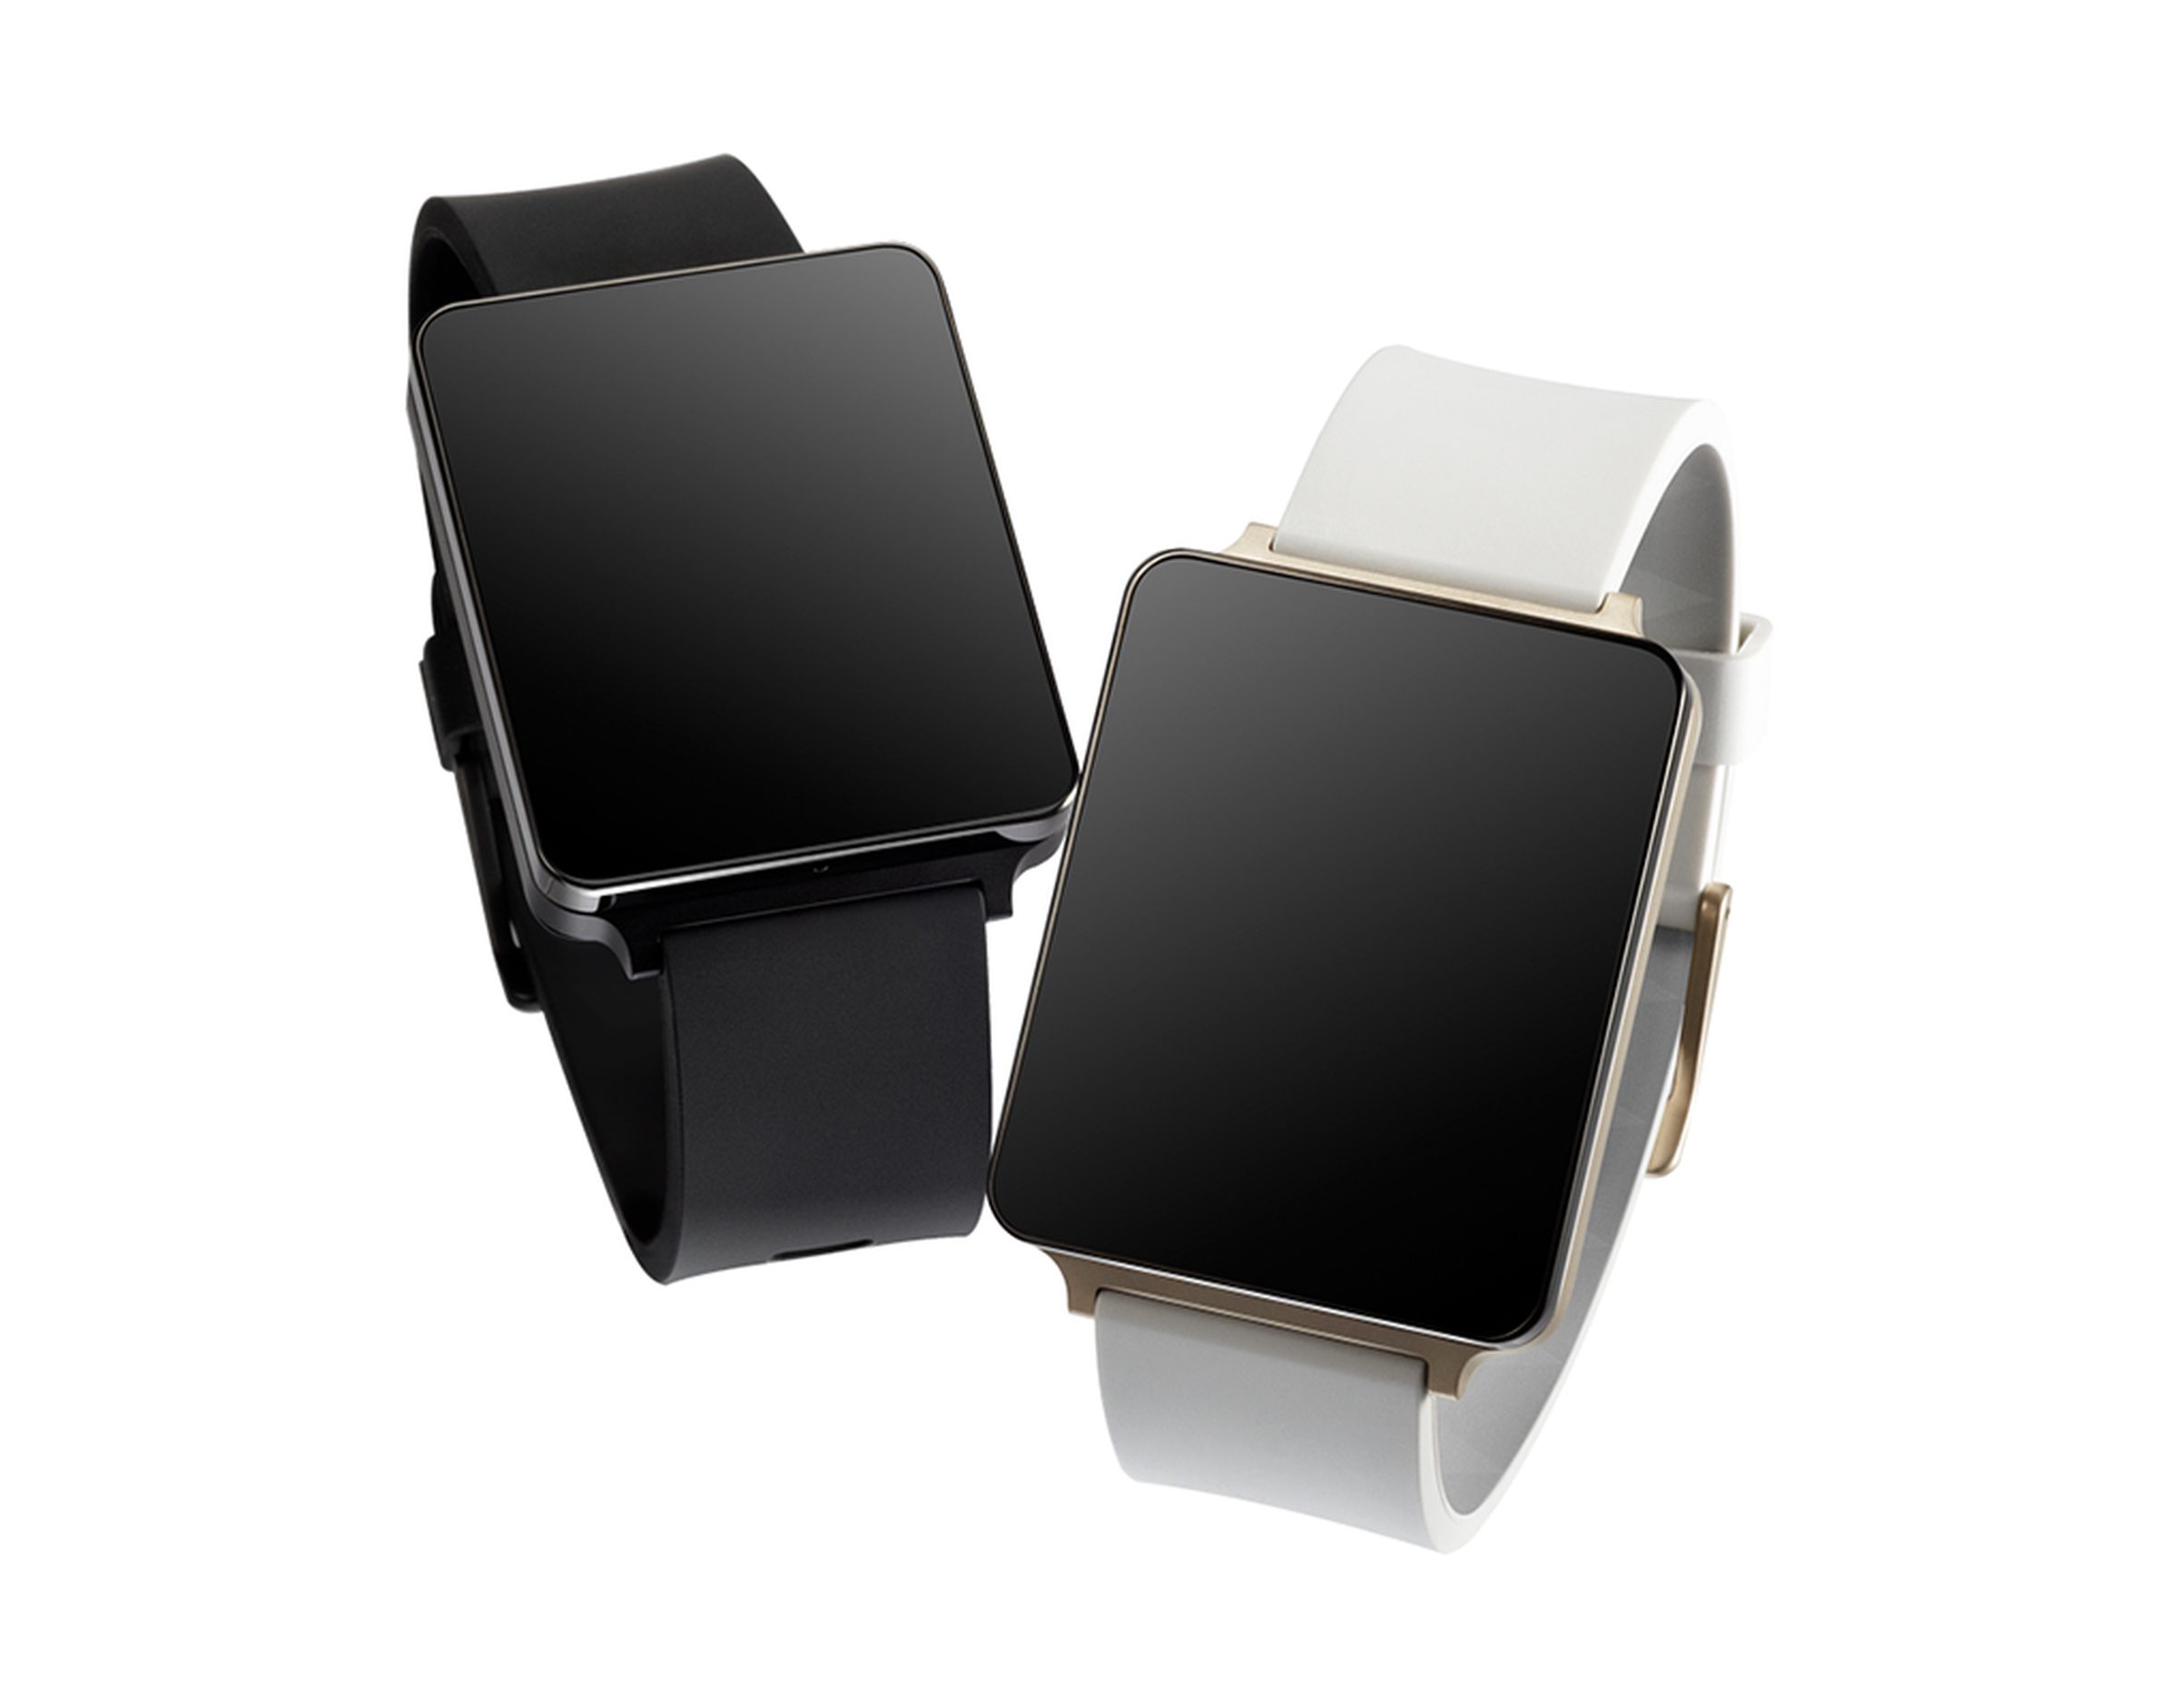 LG G Watch pictures